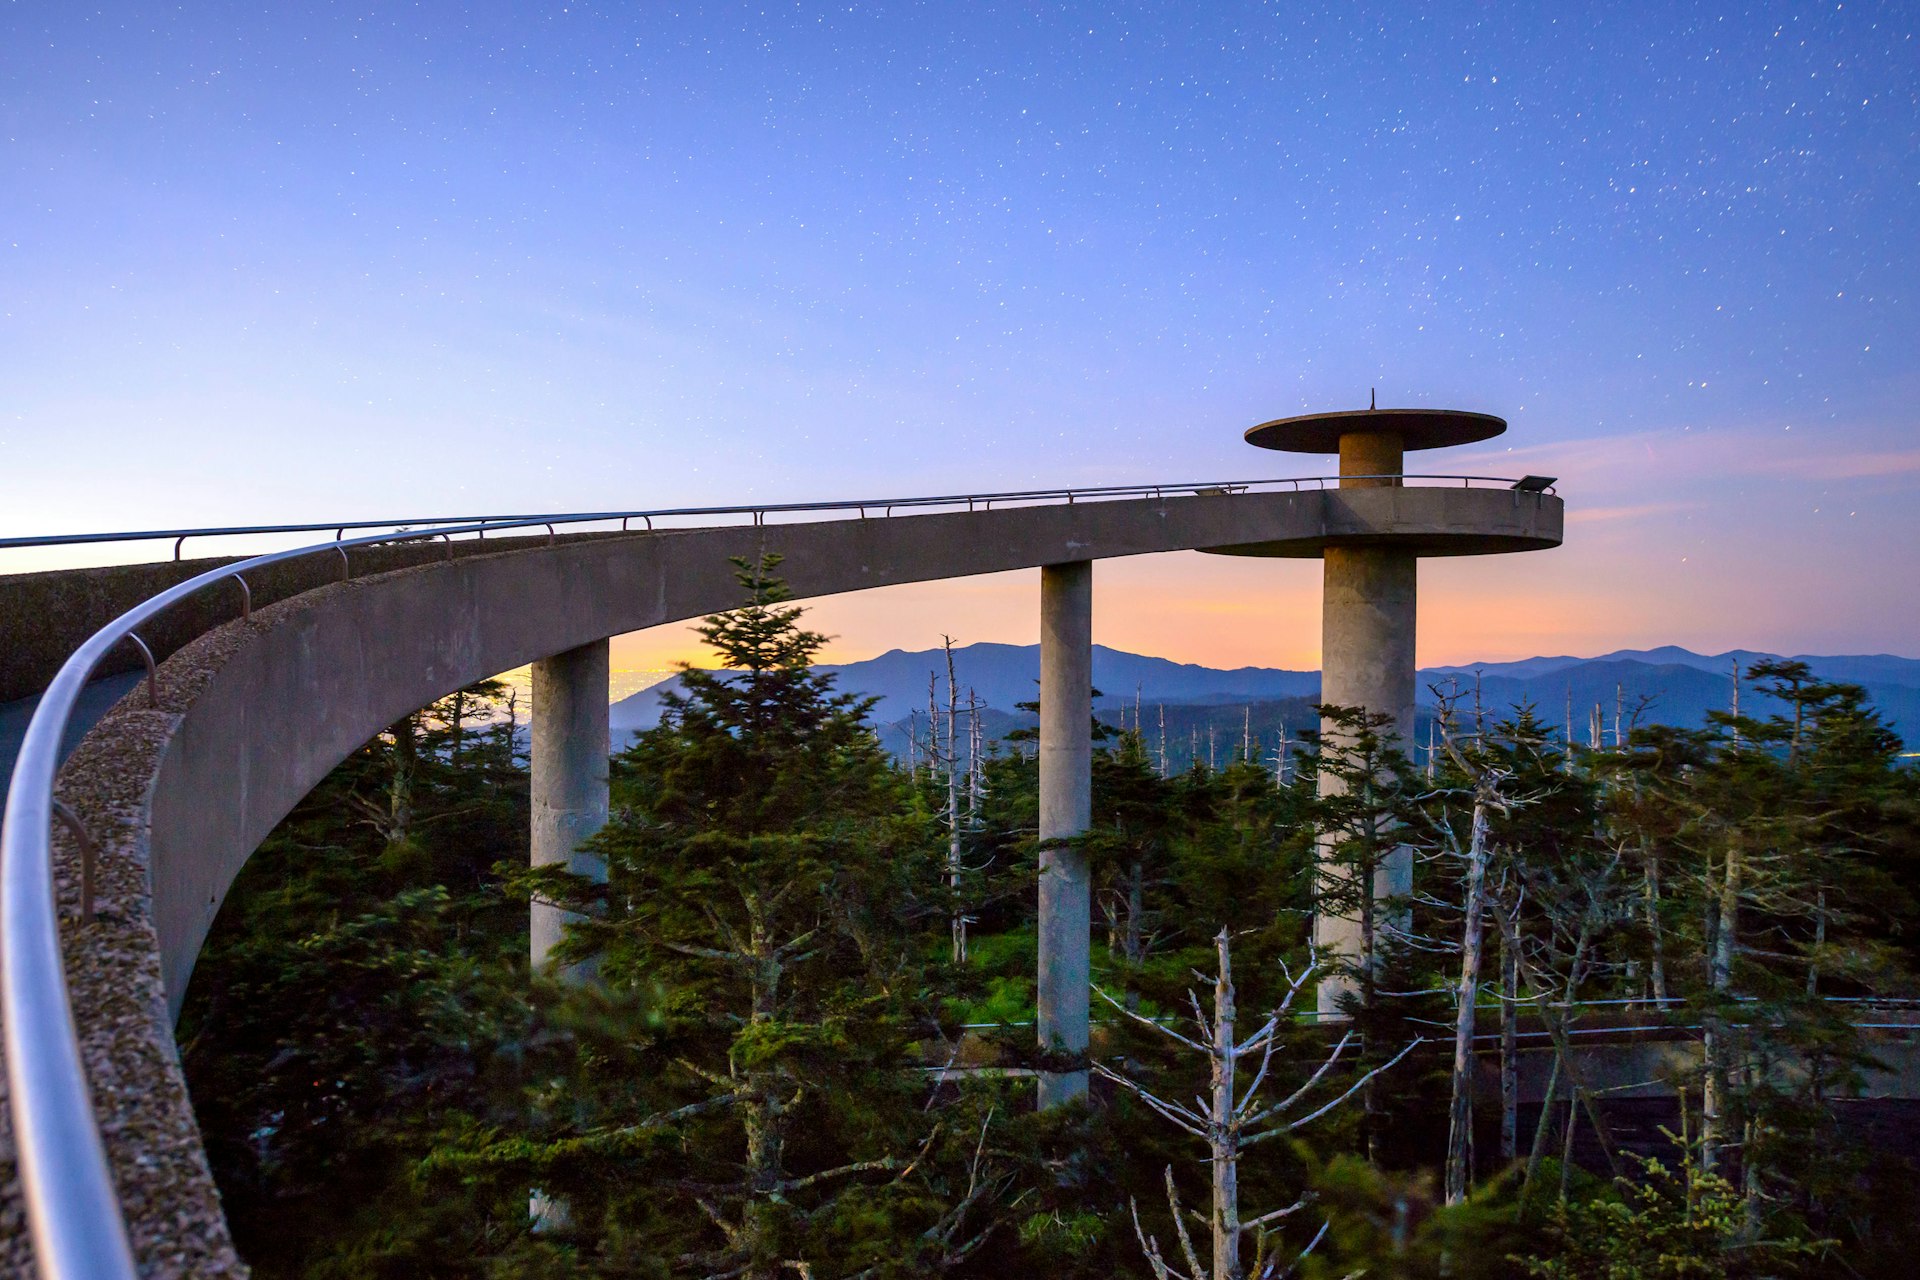 Clingman's Dome observatory